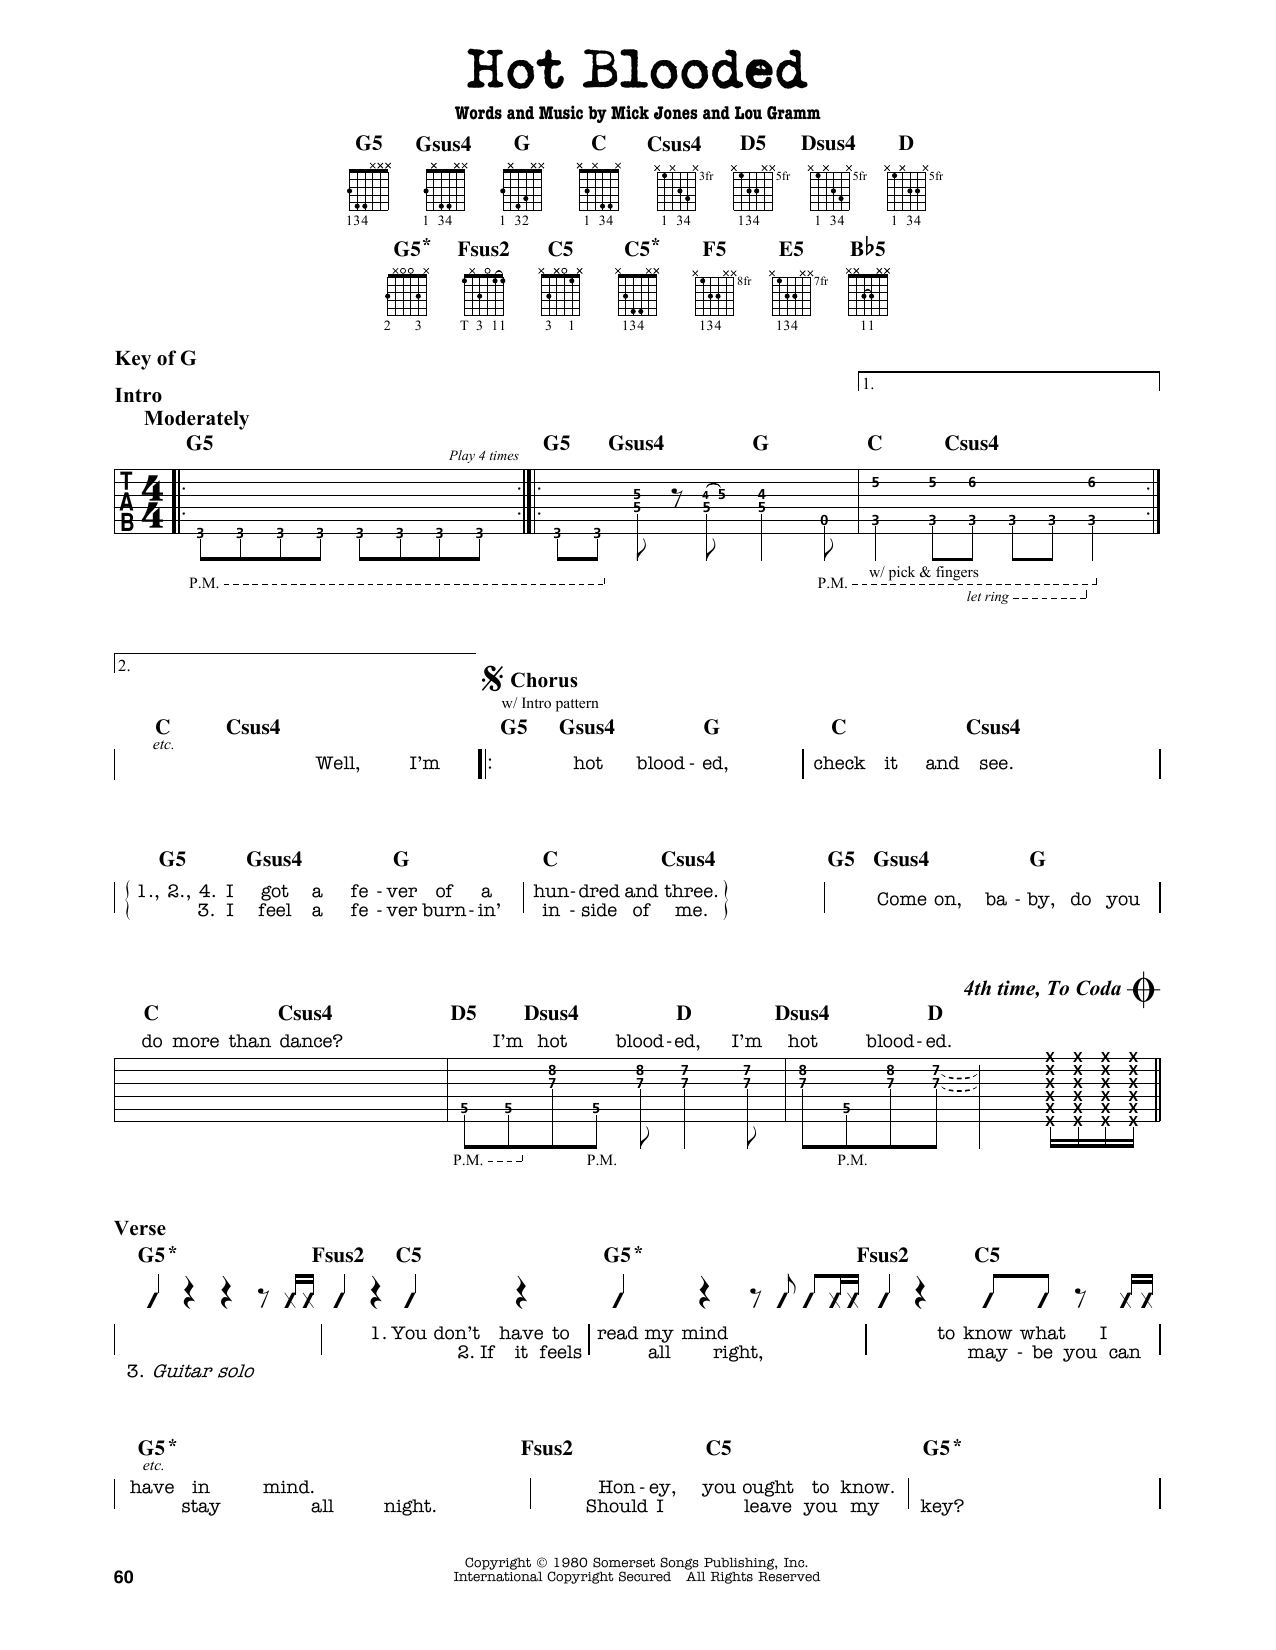 Preview Foreigner Hot Blooded Rock sheet music, notes and chords for Guitar...